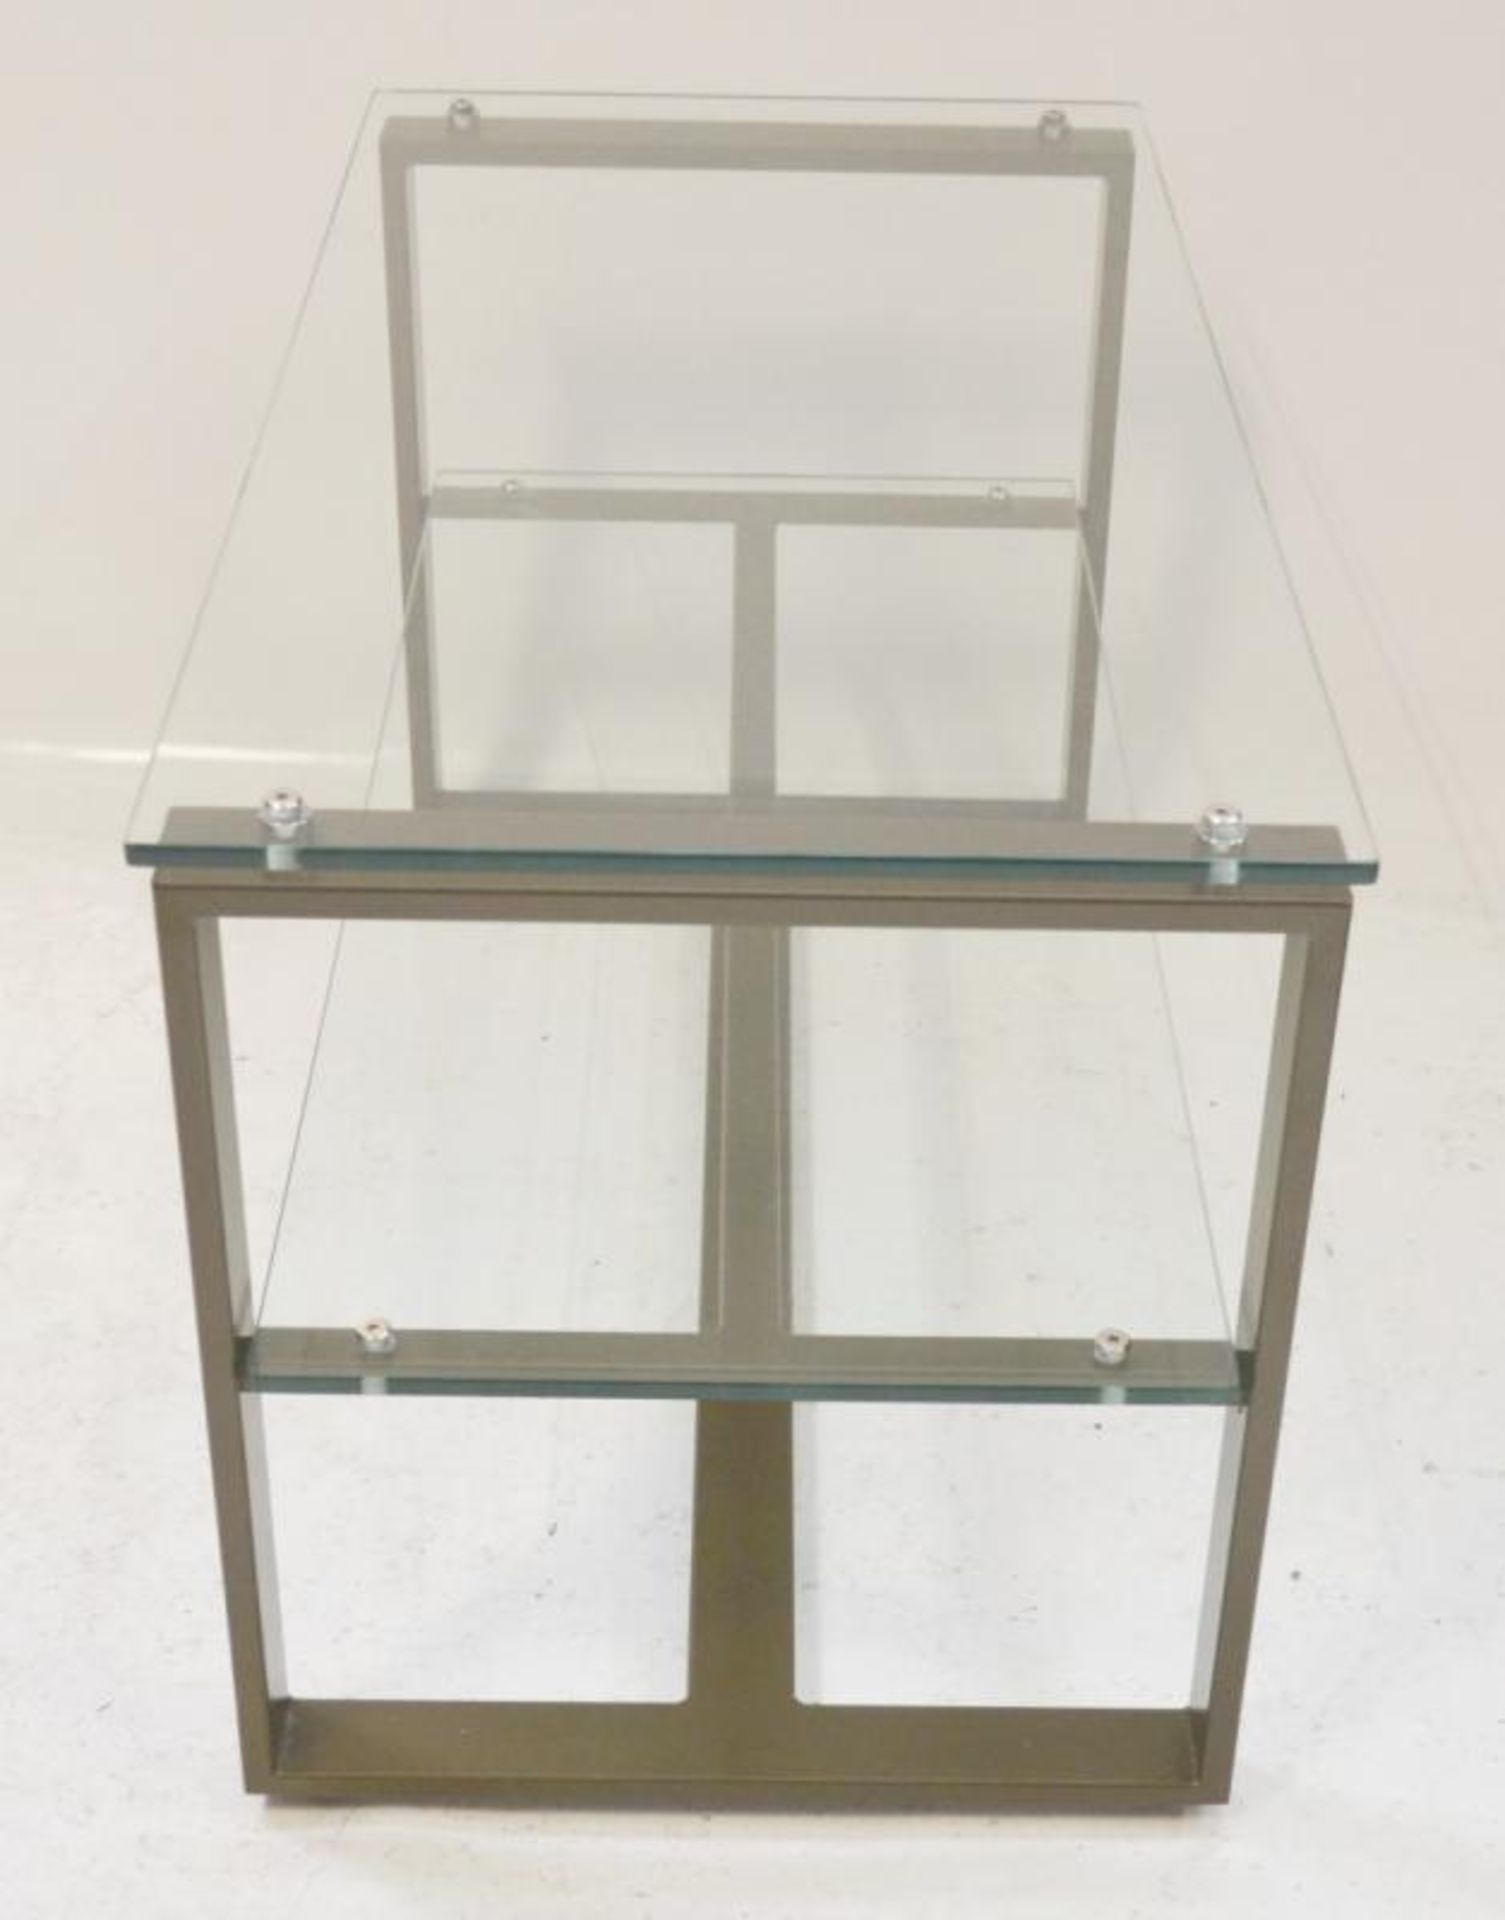 8 x Small Contemporary Retail Glass Display Units With Sturdy Metal Frames and Two Shelves - - Image 3 of 8